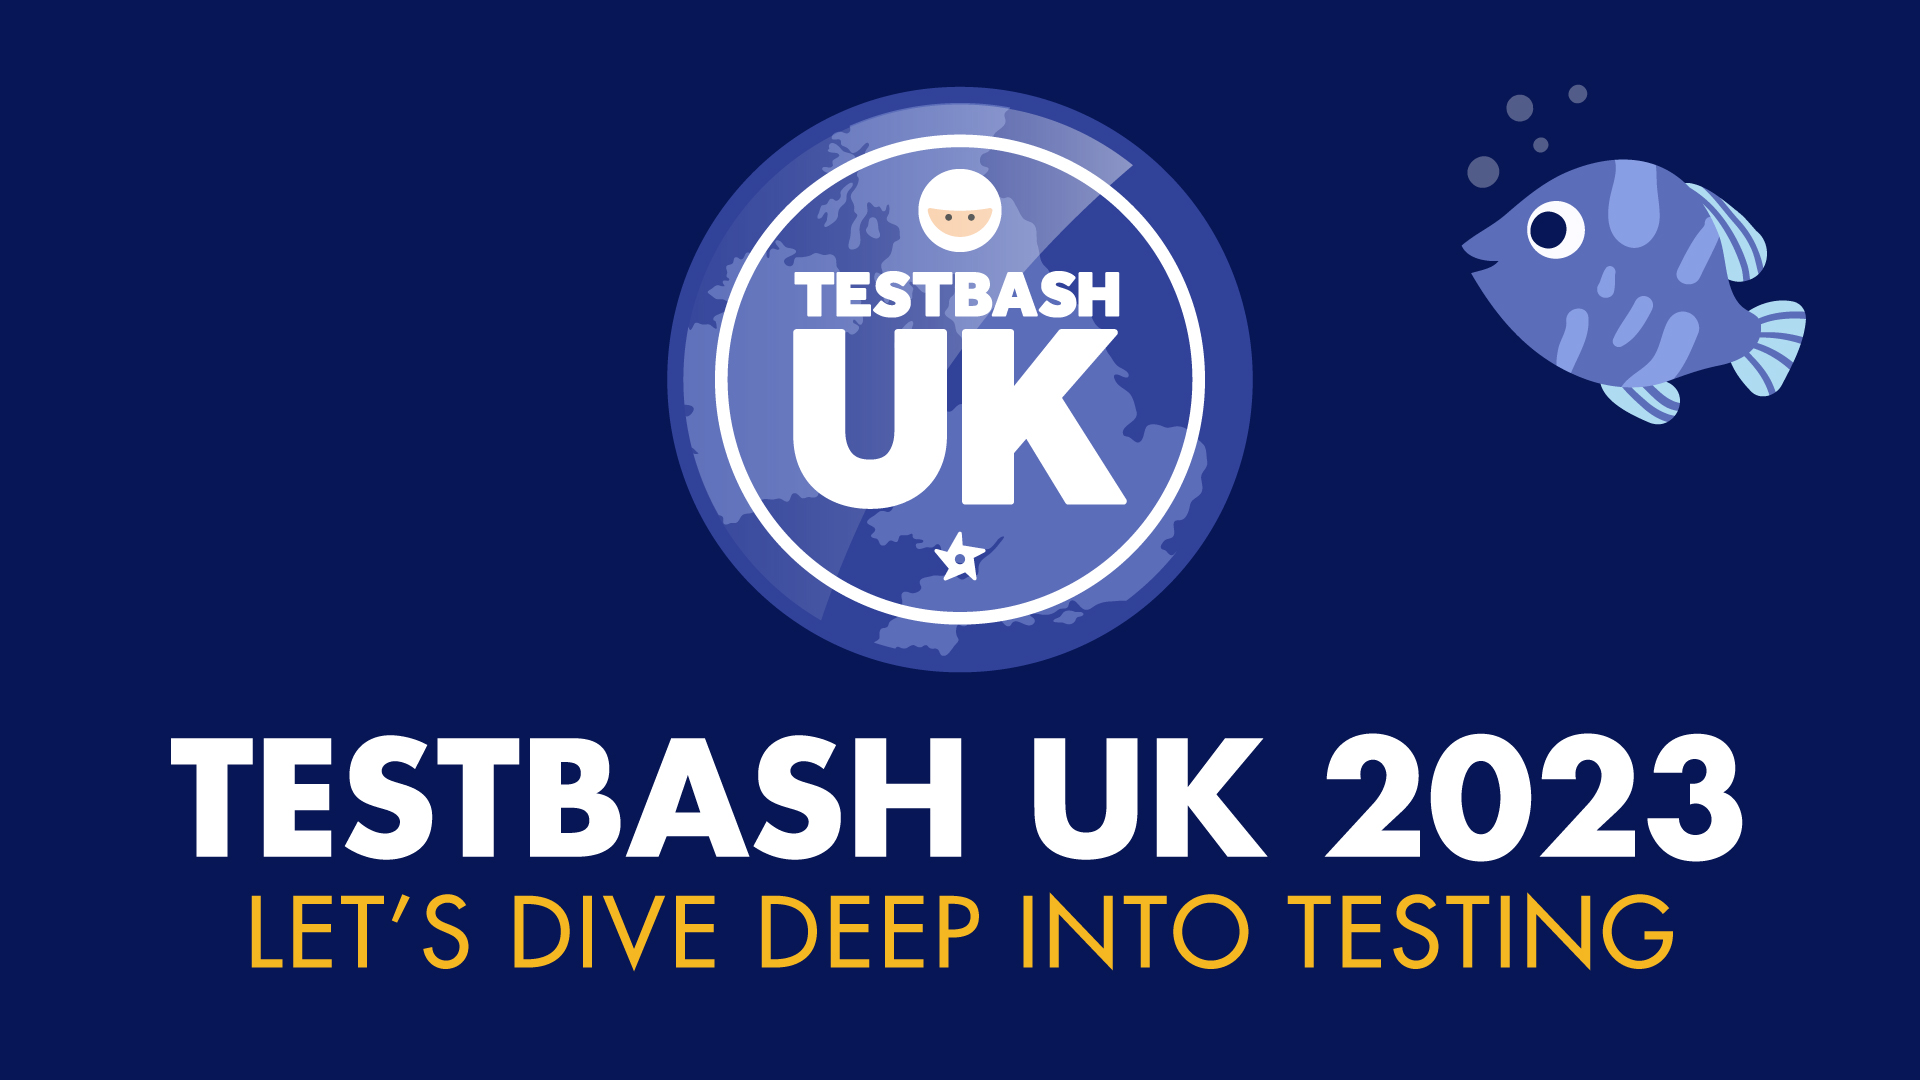 Shine at TestBash: Collaborate to Craft a Winning Abstract